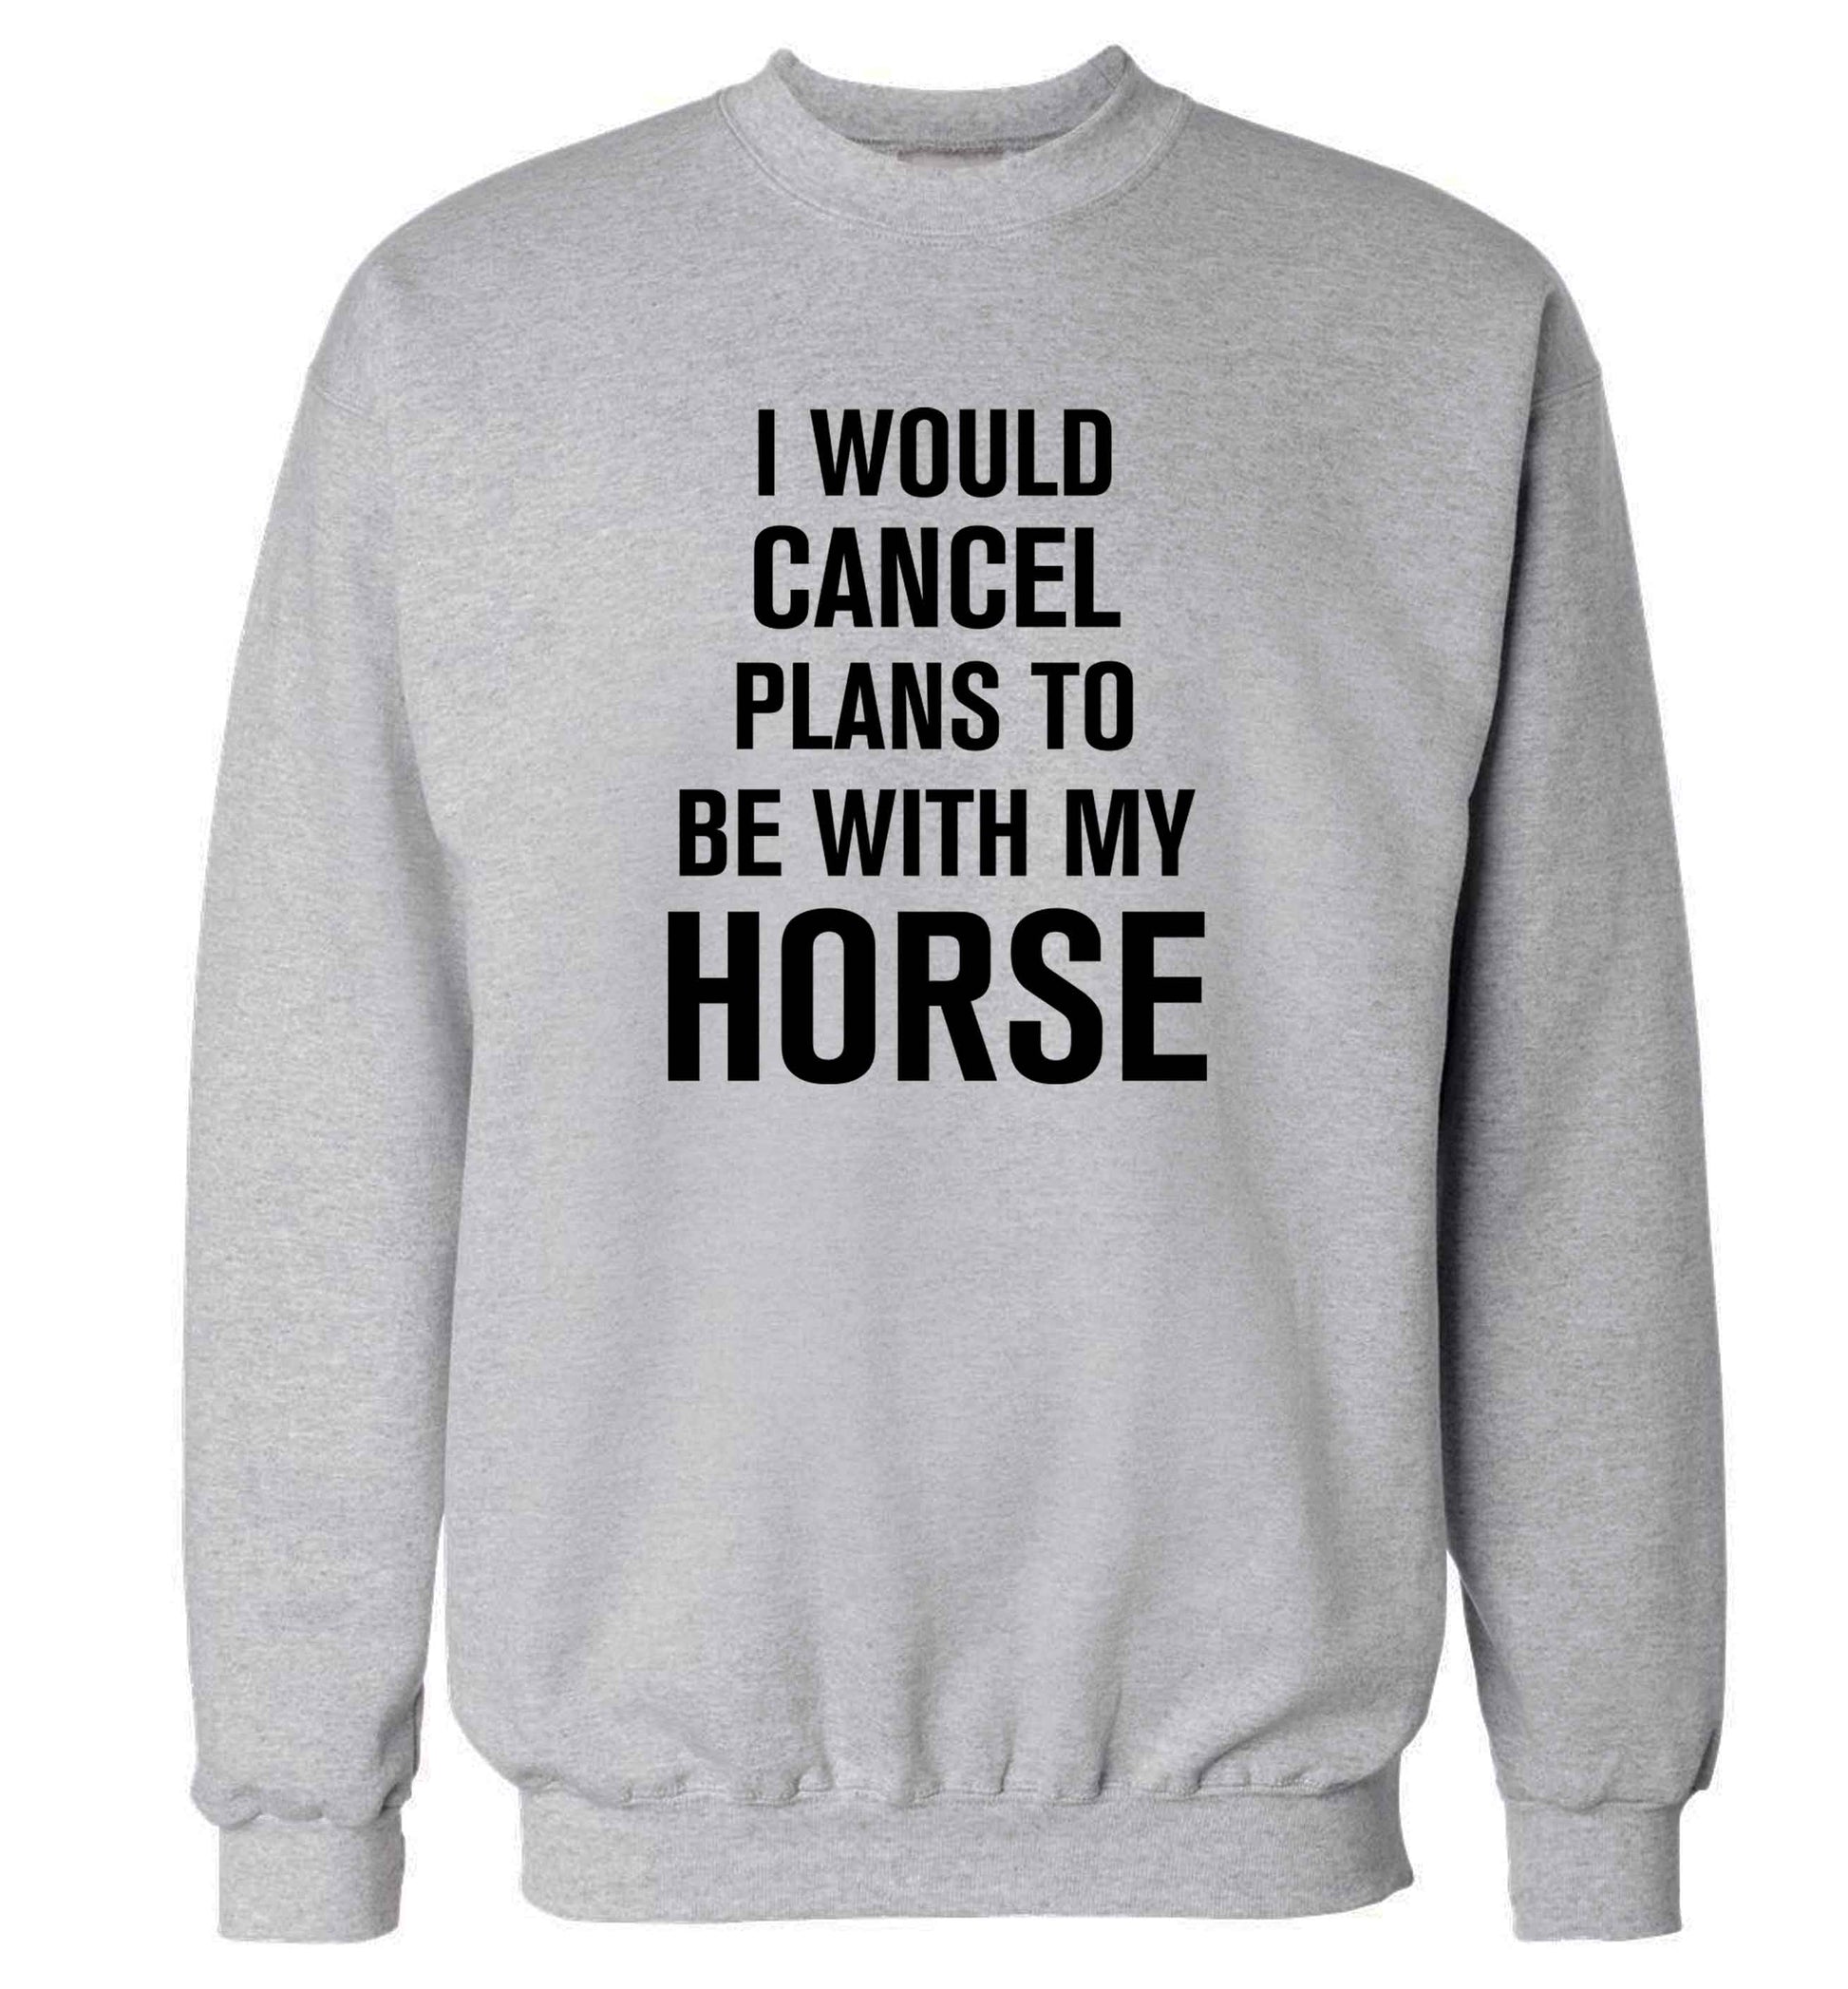 I will cancel plans to be with my horse adult's unisex grey sweater 2XL